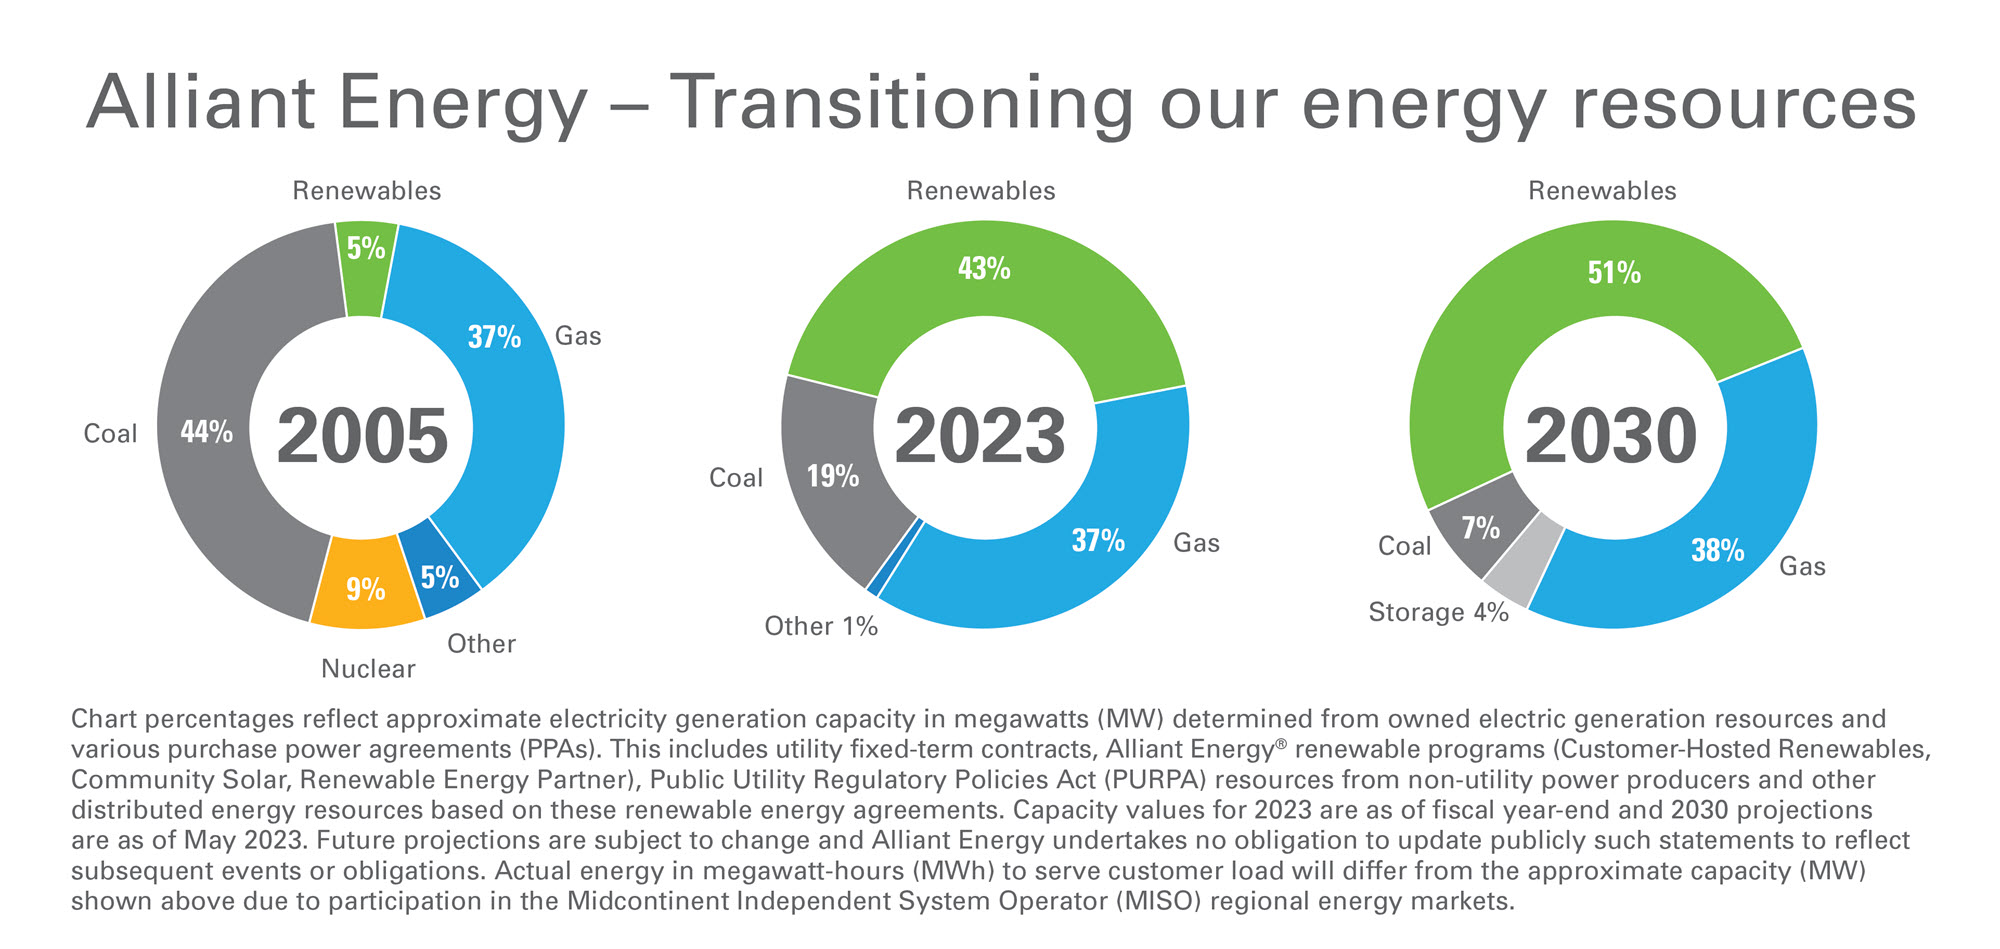 by 2030 our energy portfolio is expected to be 53% renewable, 40% gas and 7% coal.